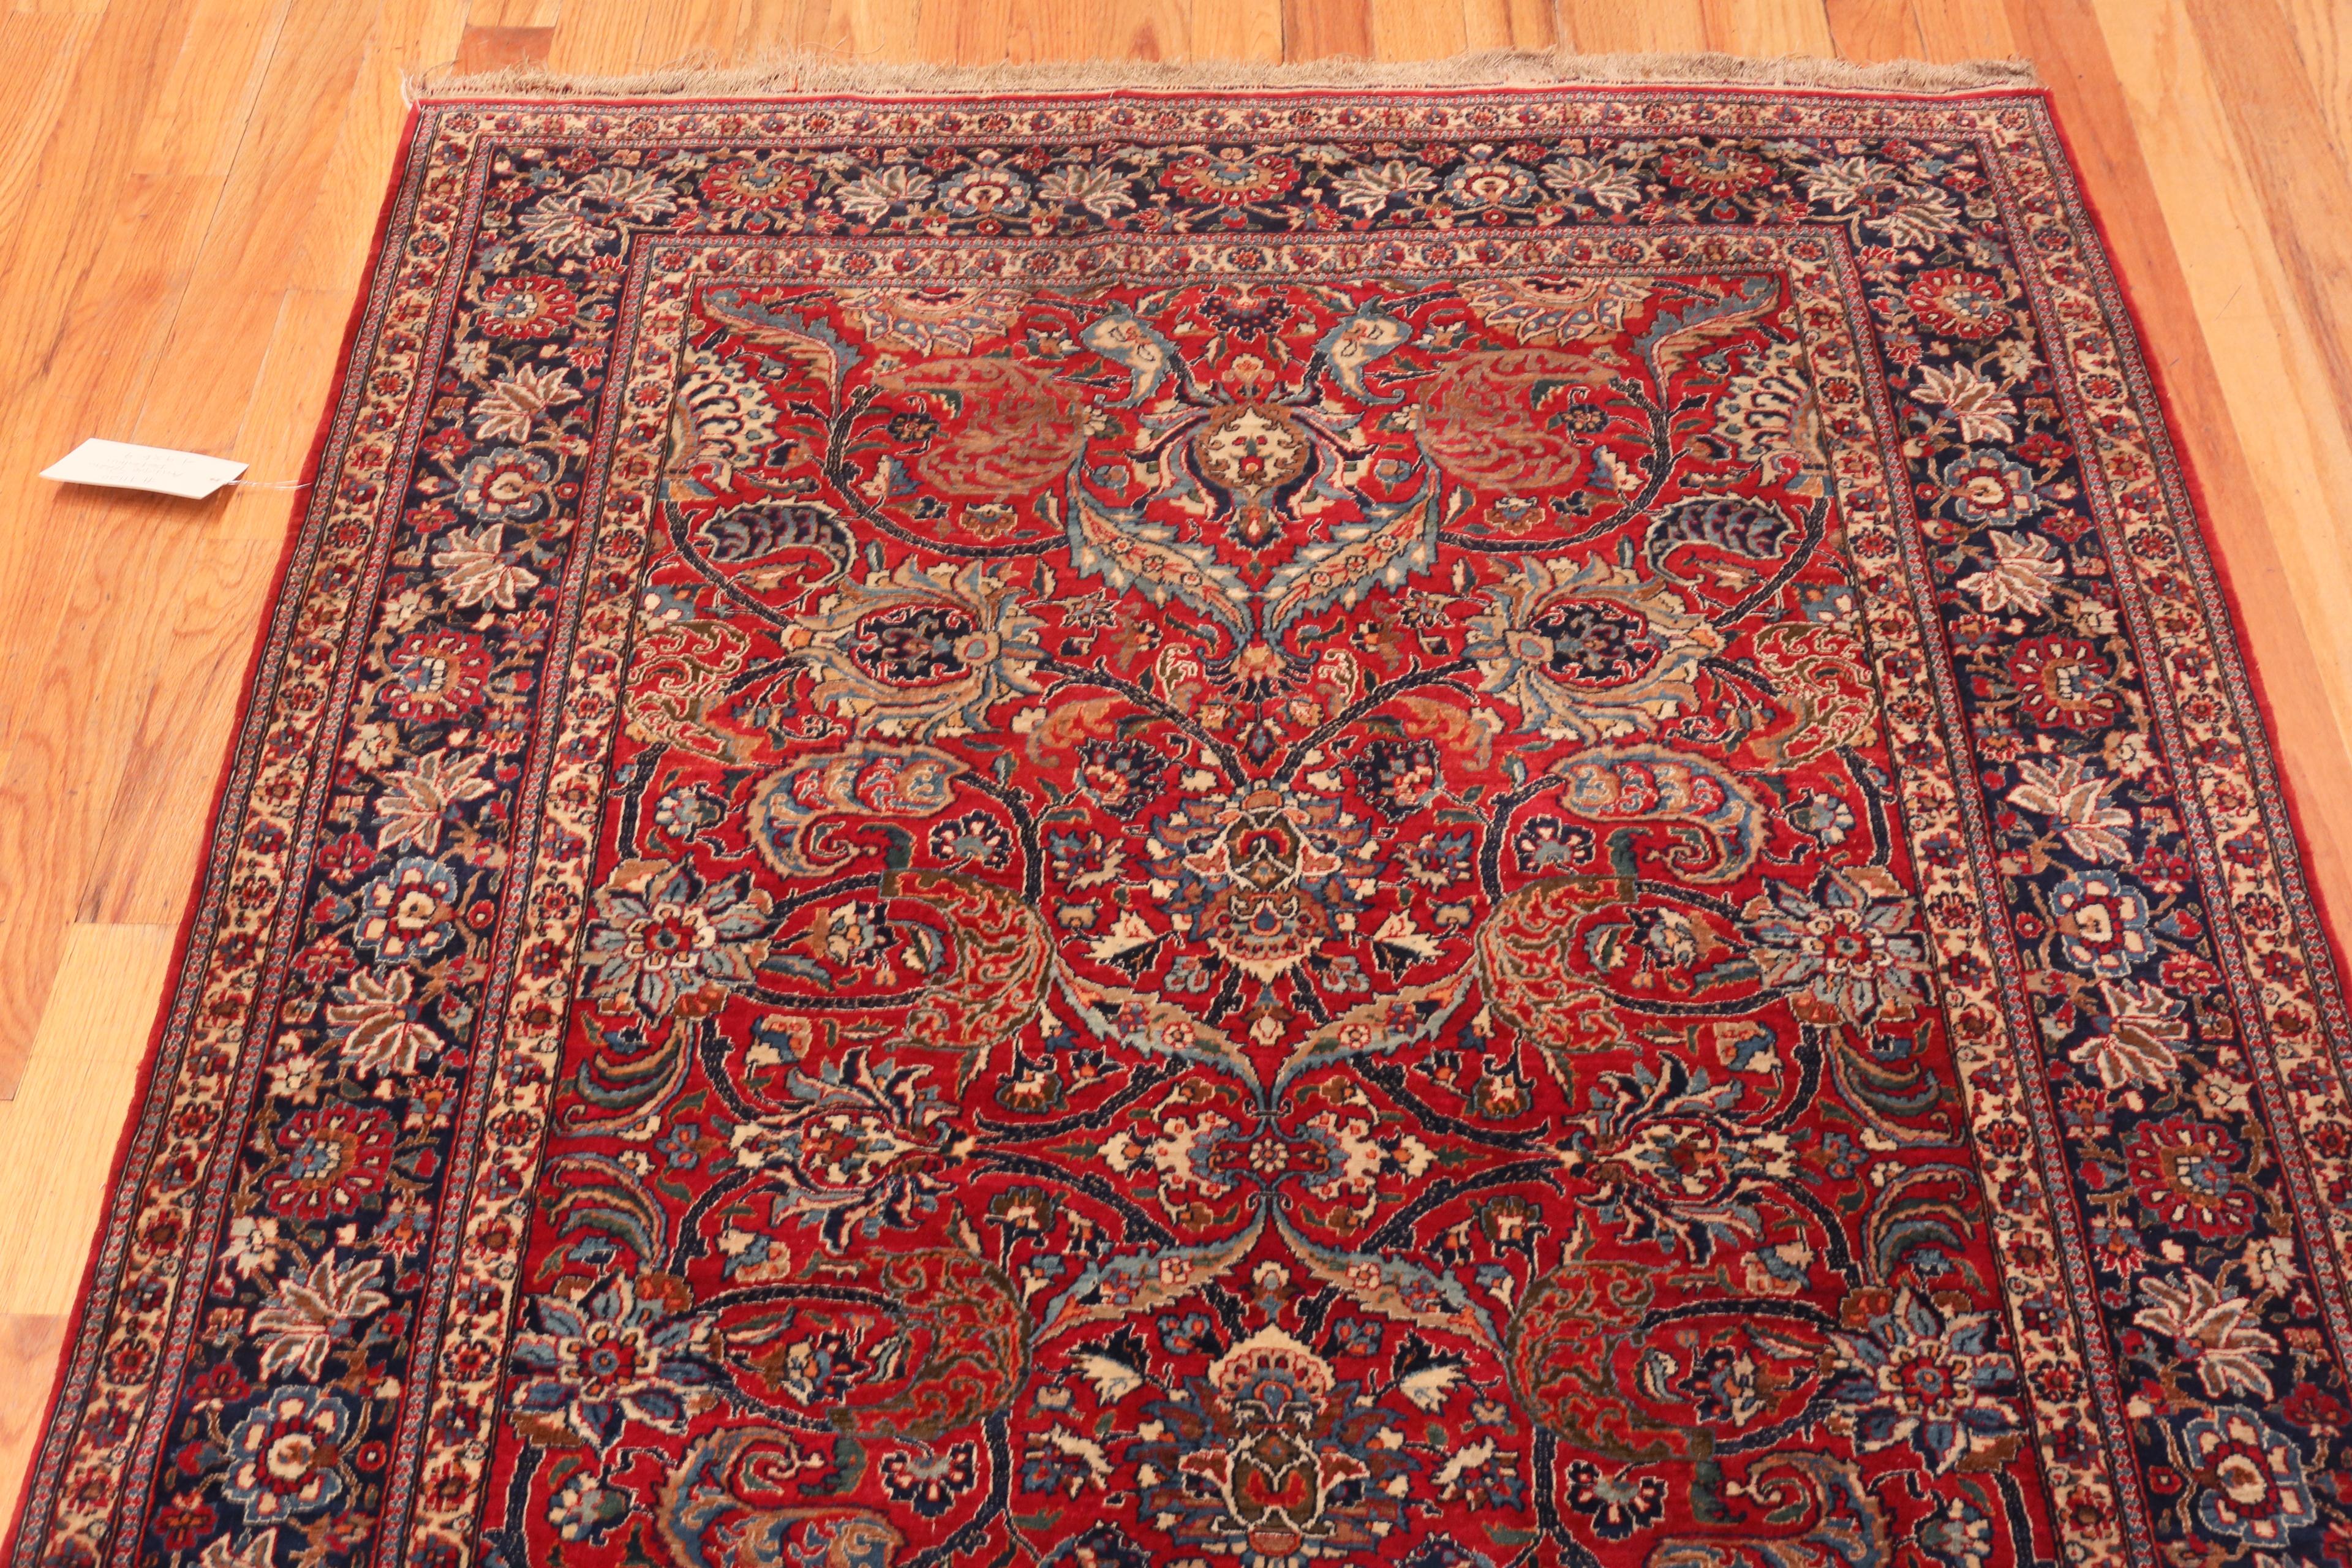 Striking Antique Persian Isfahan Rug, Country Of Origin / Rug Type: Persian Rug, Circa date: 1920. Size: 4 ft 9 in x 7 ft 2 in (1.44 m x 2.18 m).